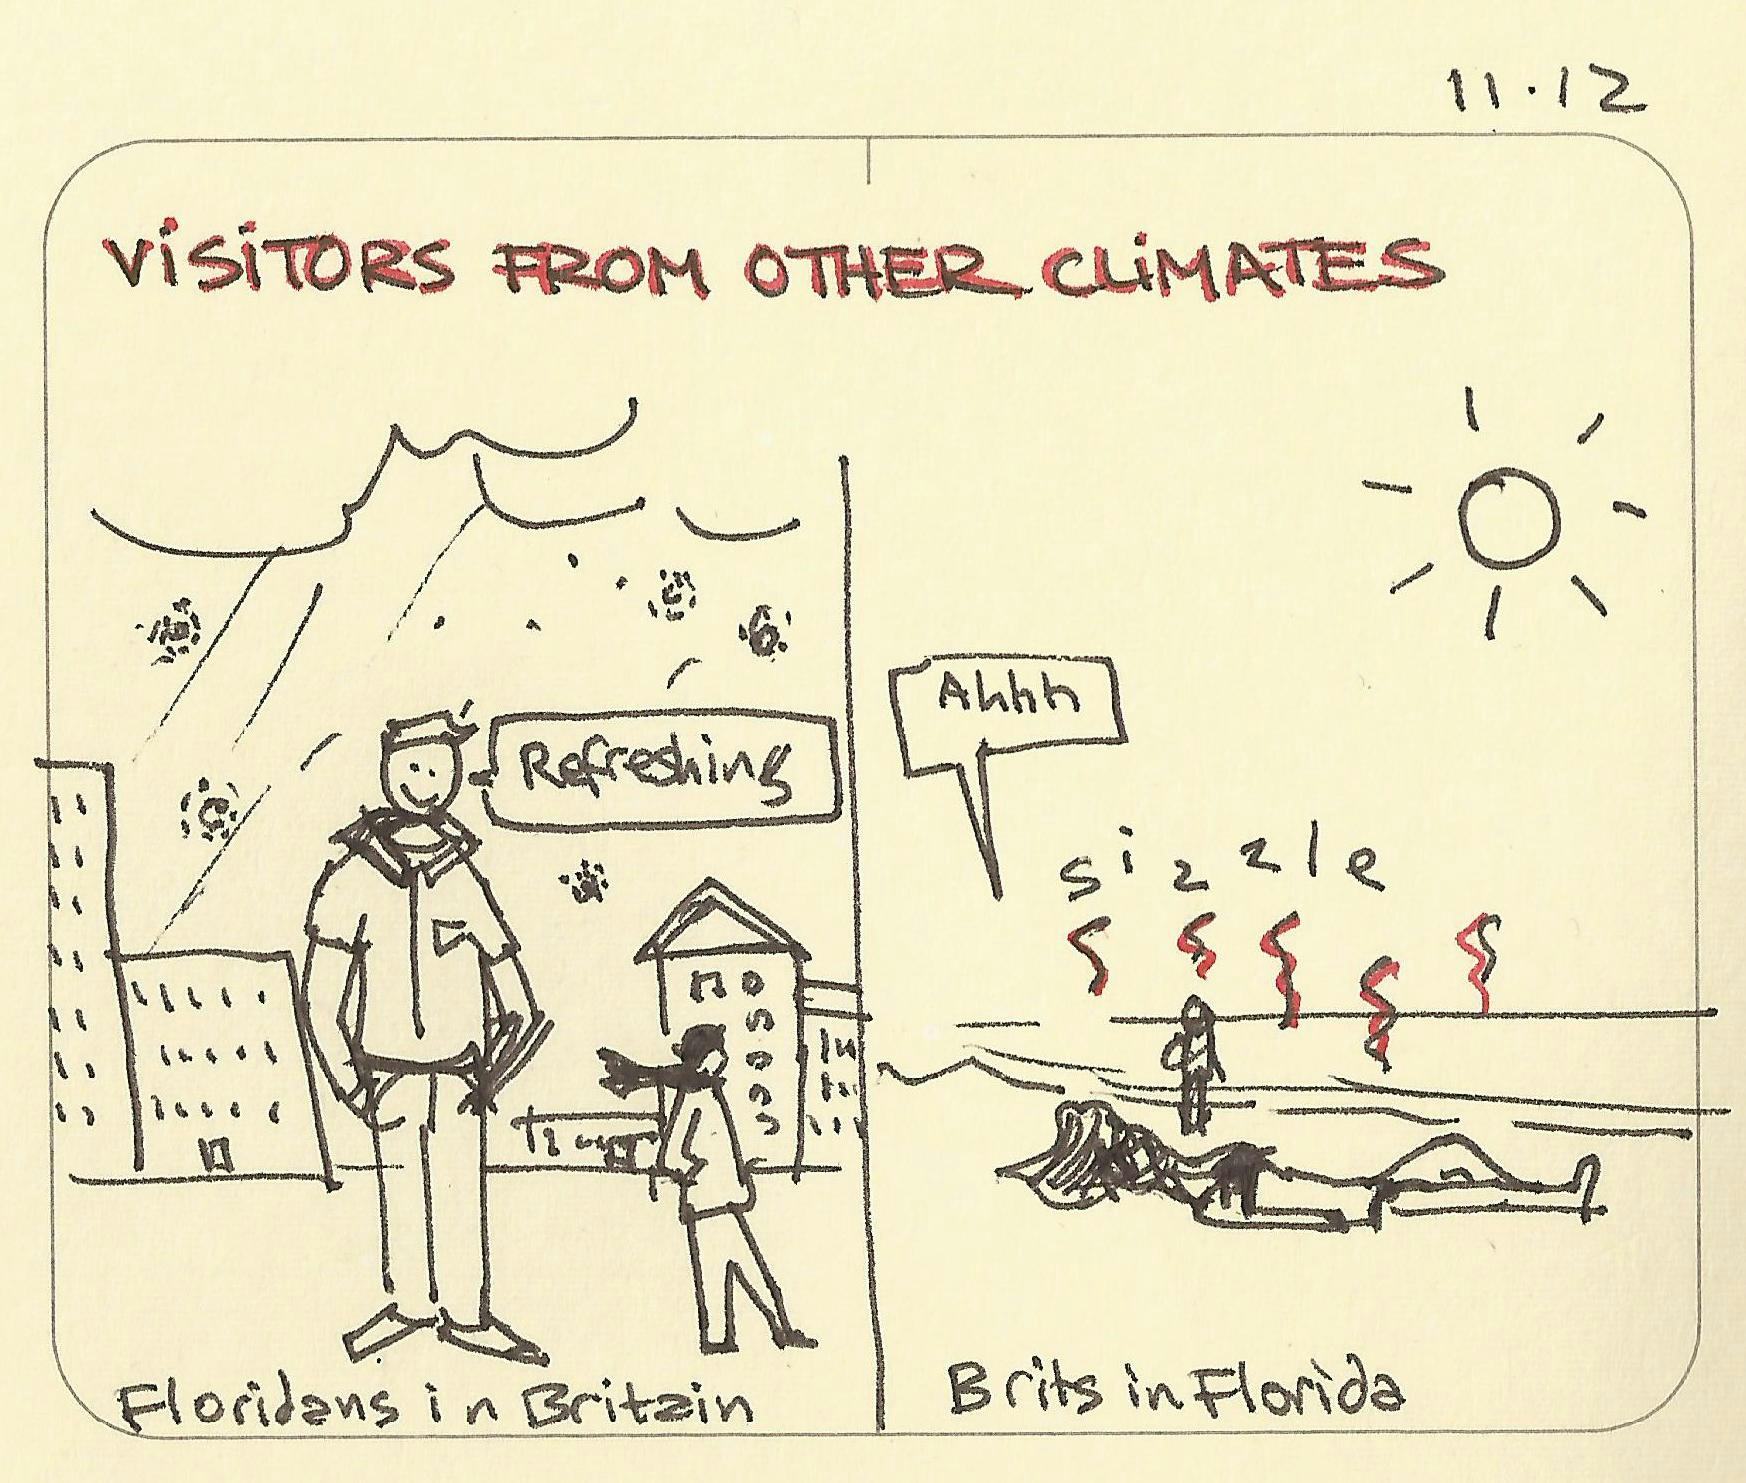 Visitors from other climates - Sketchplanations